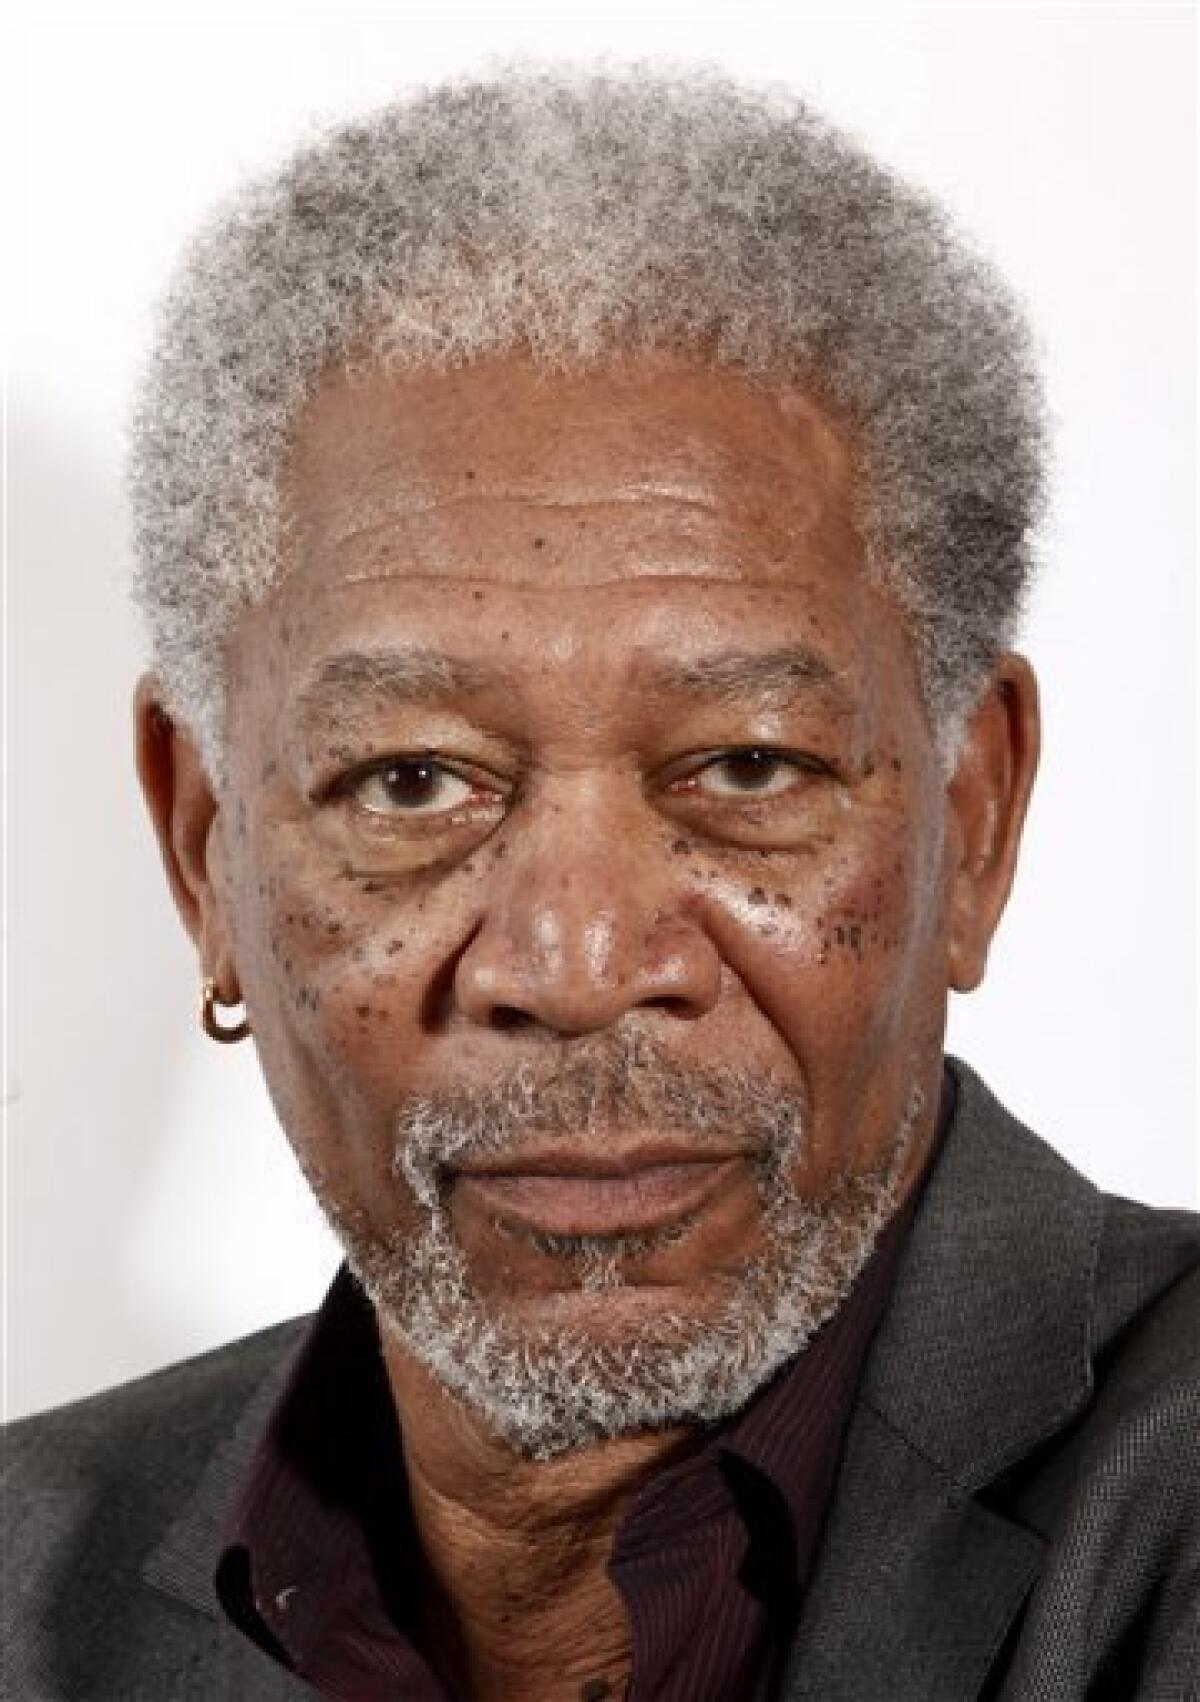 FILE - In this Dec. 5, 2009 file photo, Morgan Freeman, a cast member in the upcoming film "Invictus", poses for a portrait in Beverly Hills, Calif. (AP Photo/Matt Sayles, file)